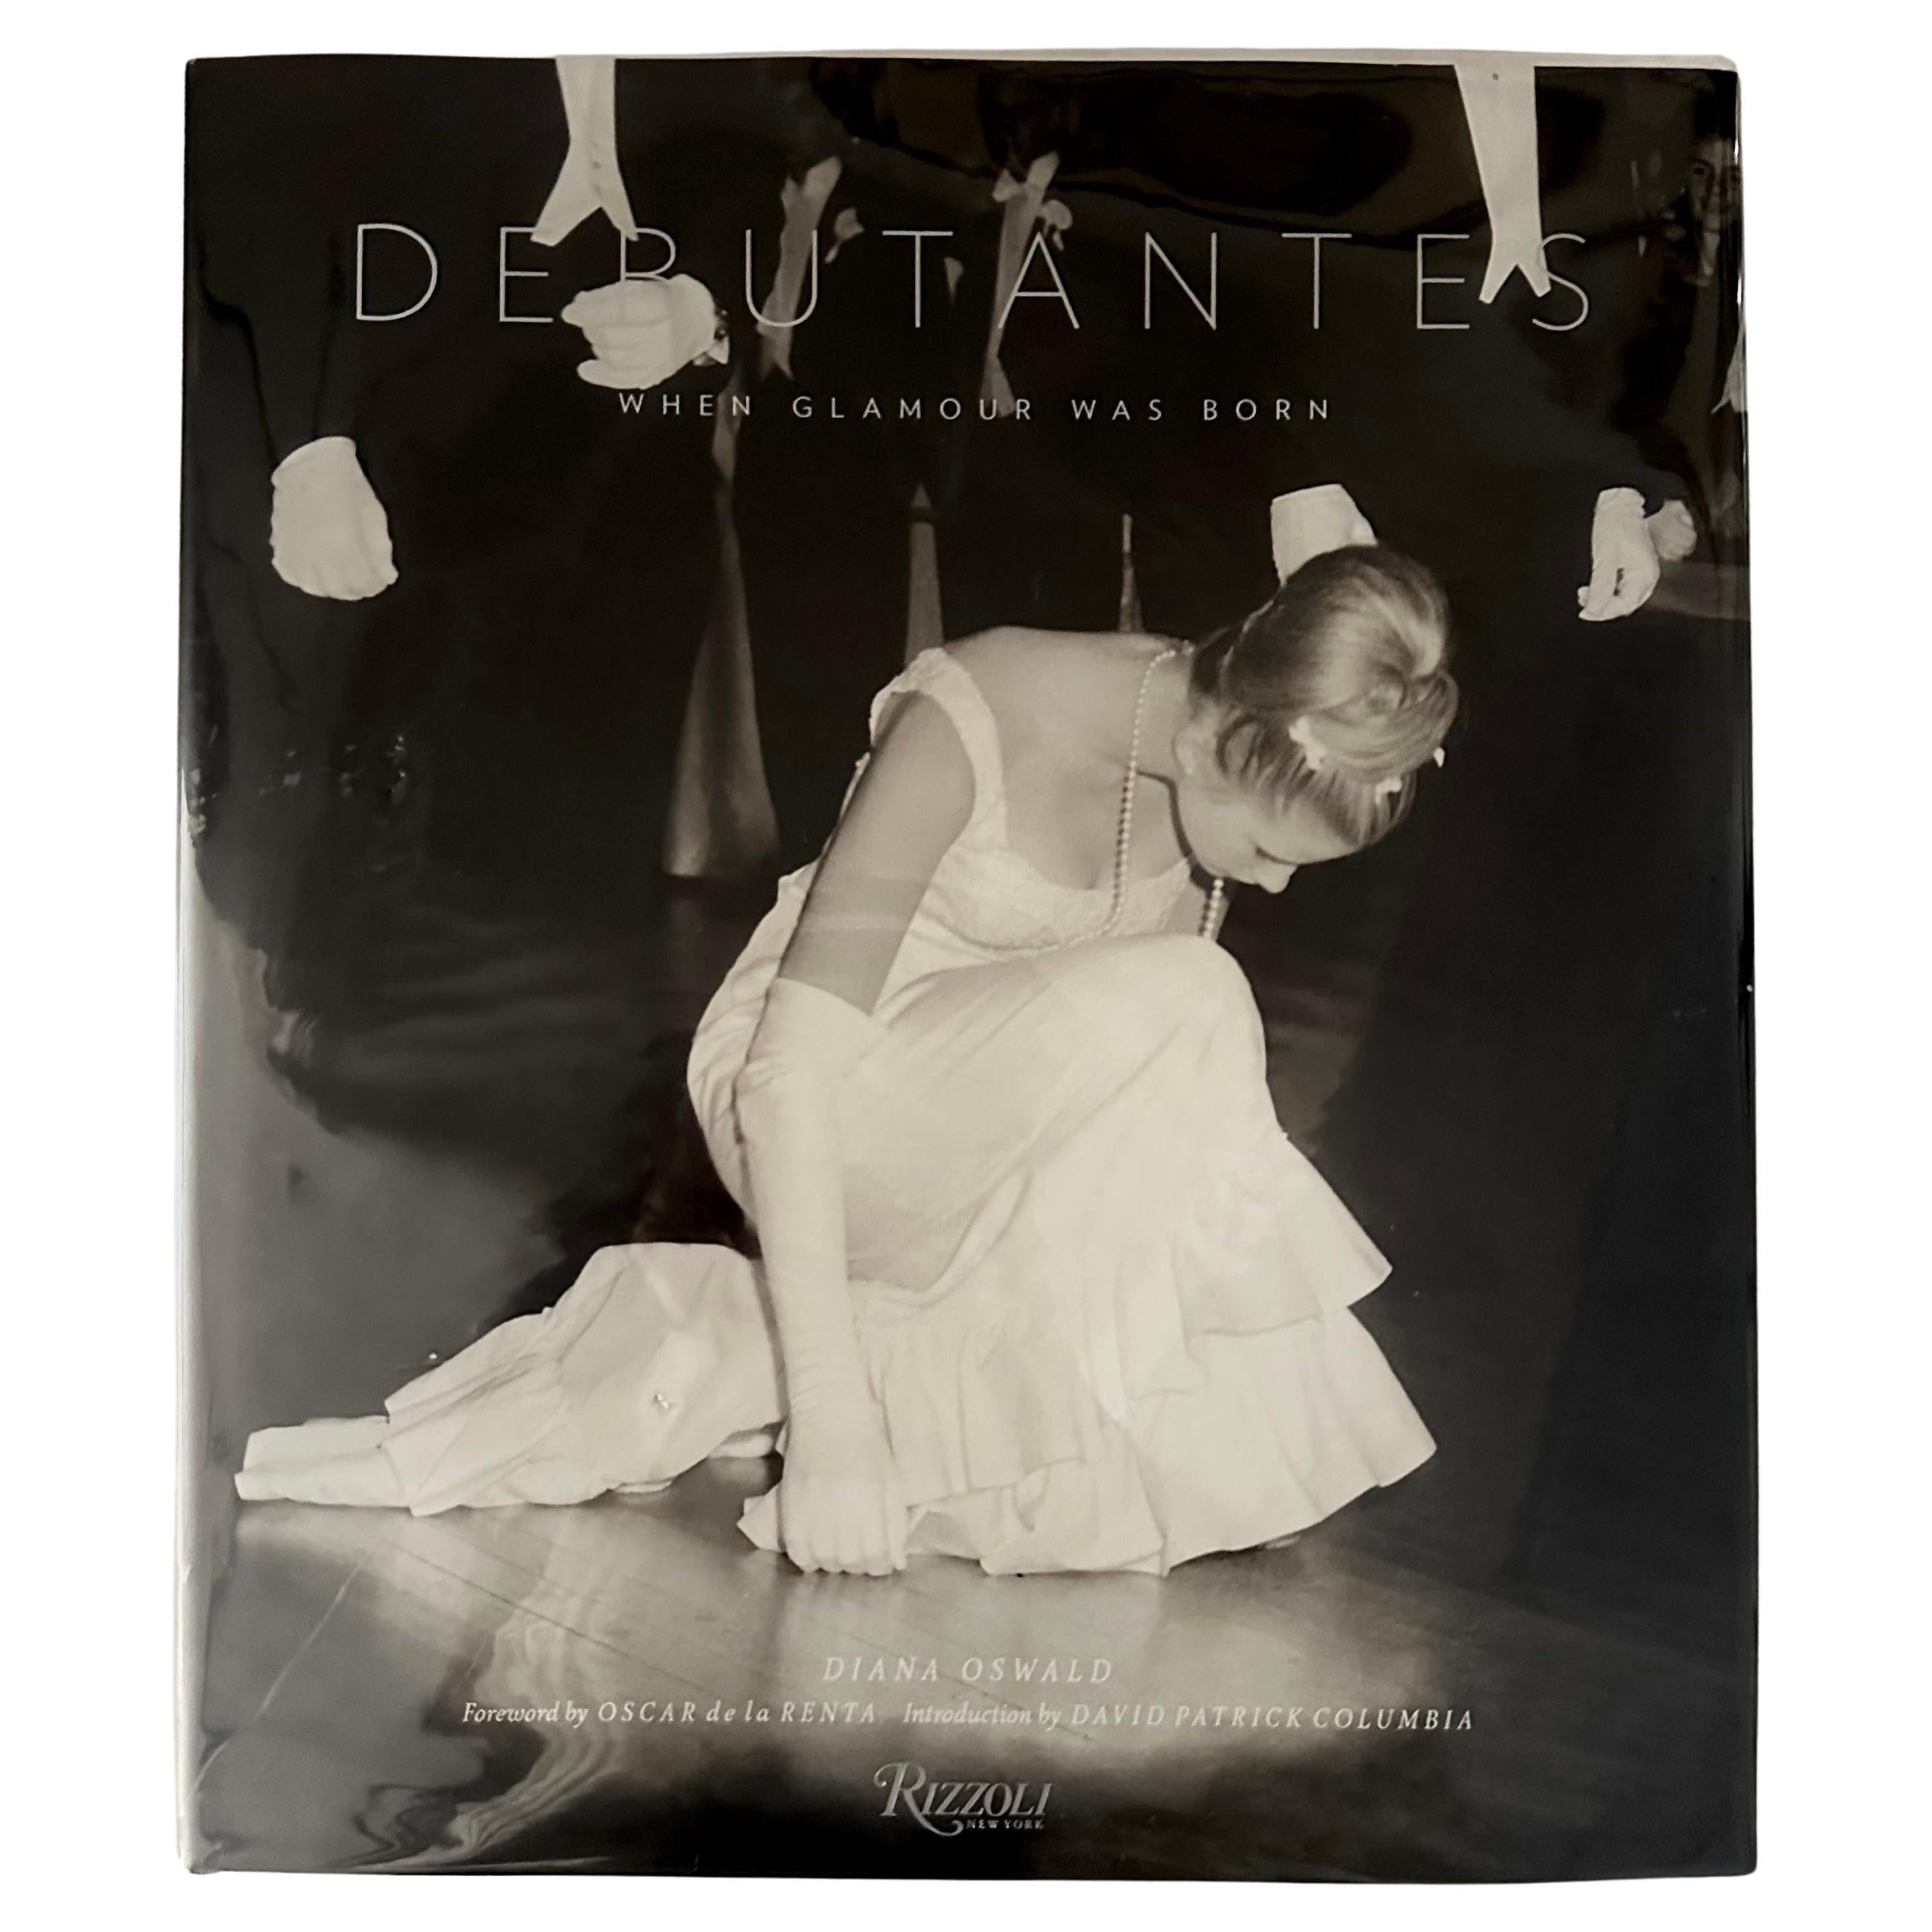 Debutantes: When Glamour was Born - Diana Oswald - 1st edition, New York, 2013 For Sale